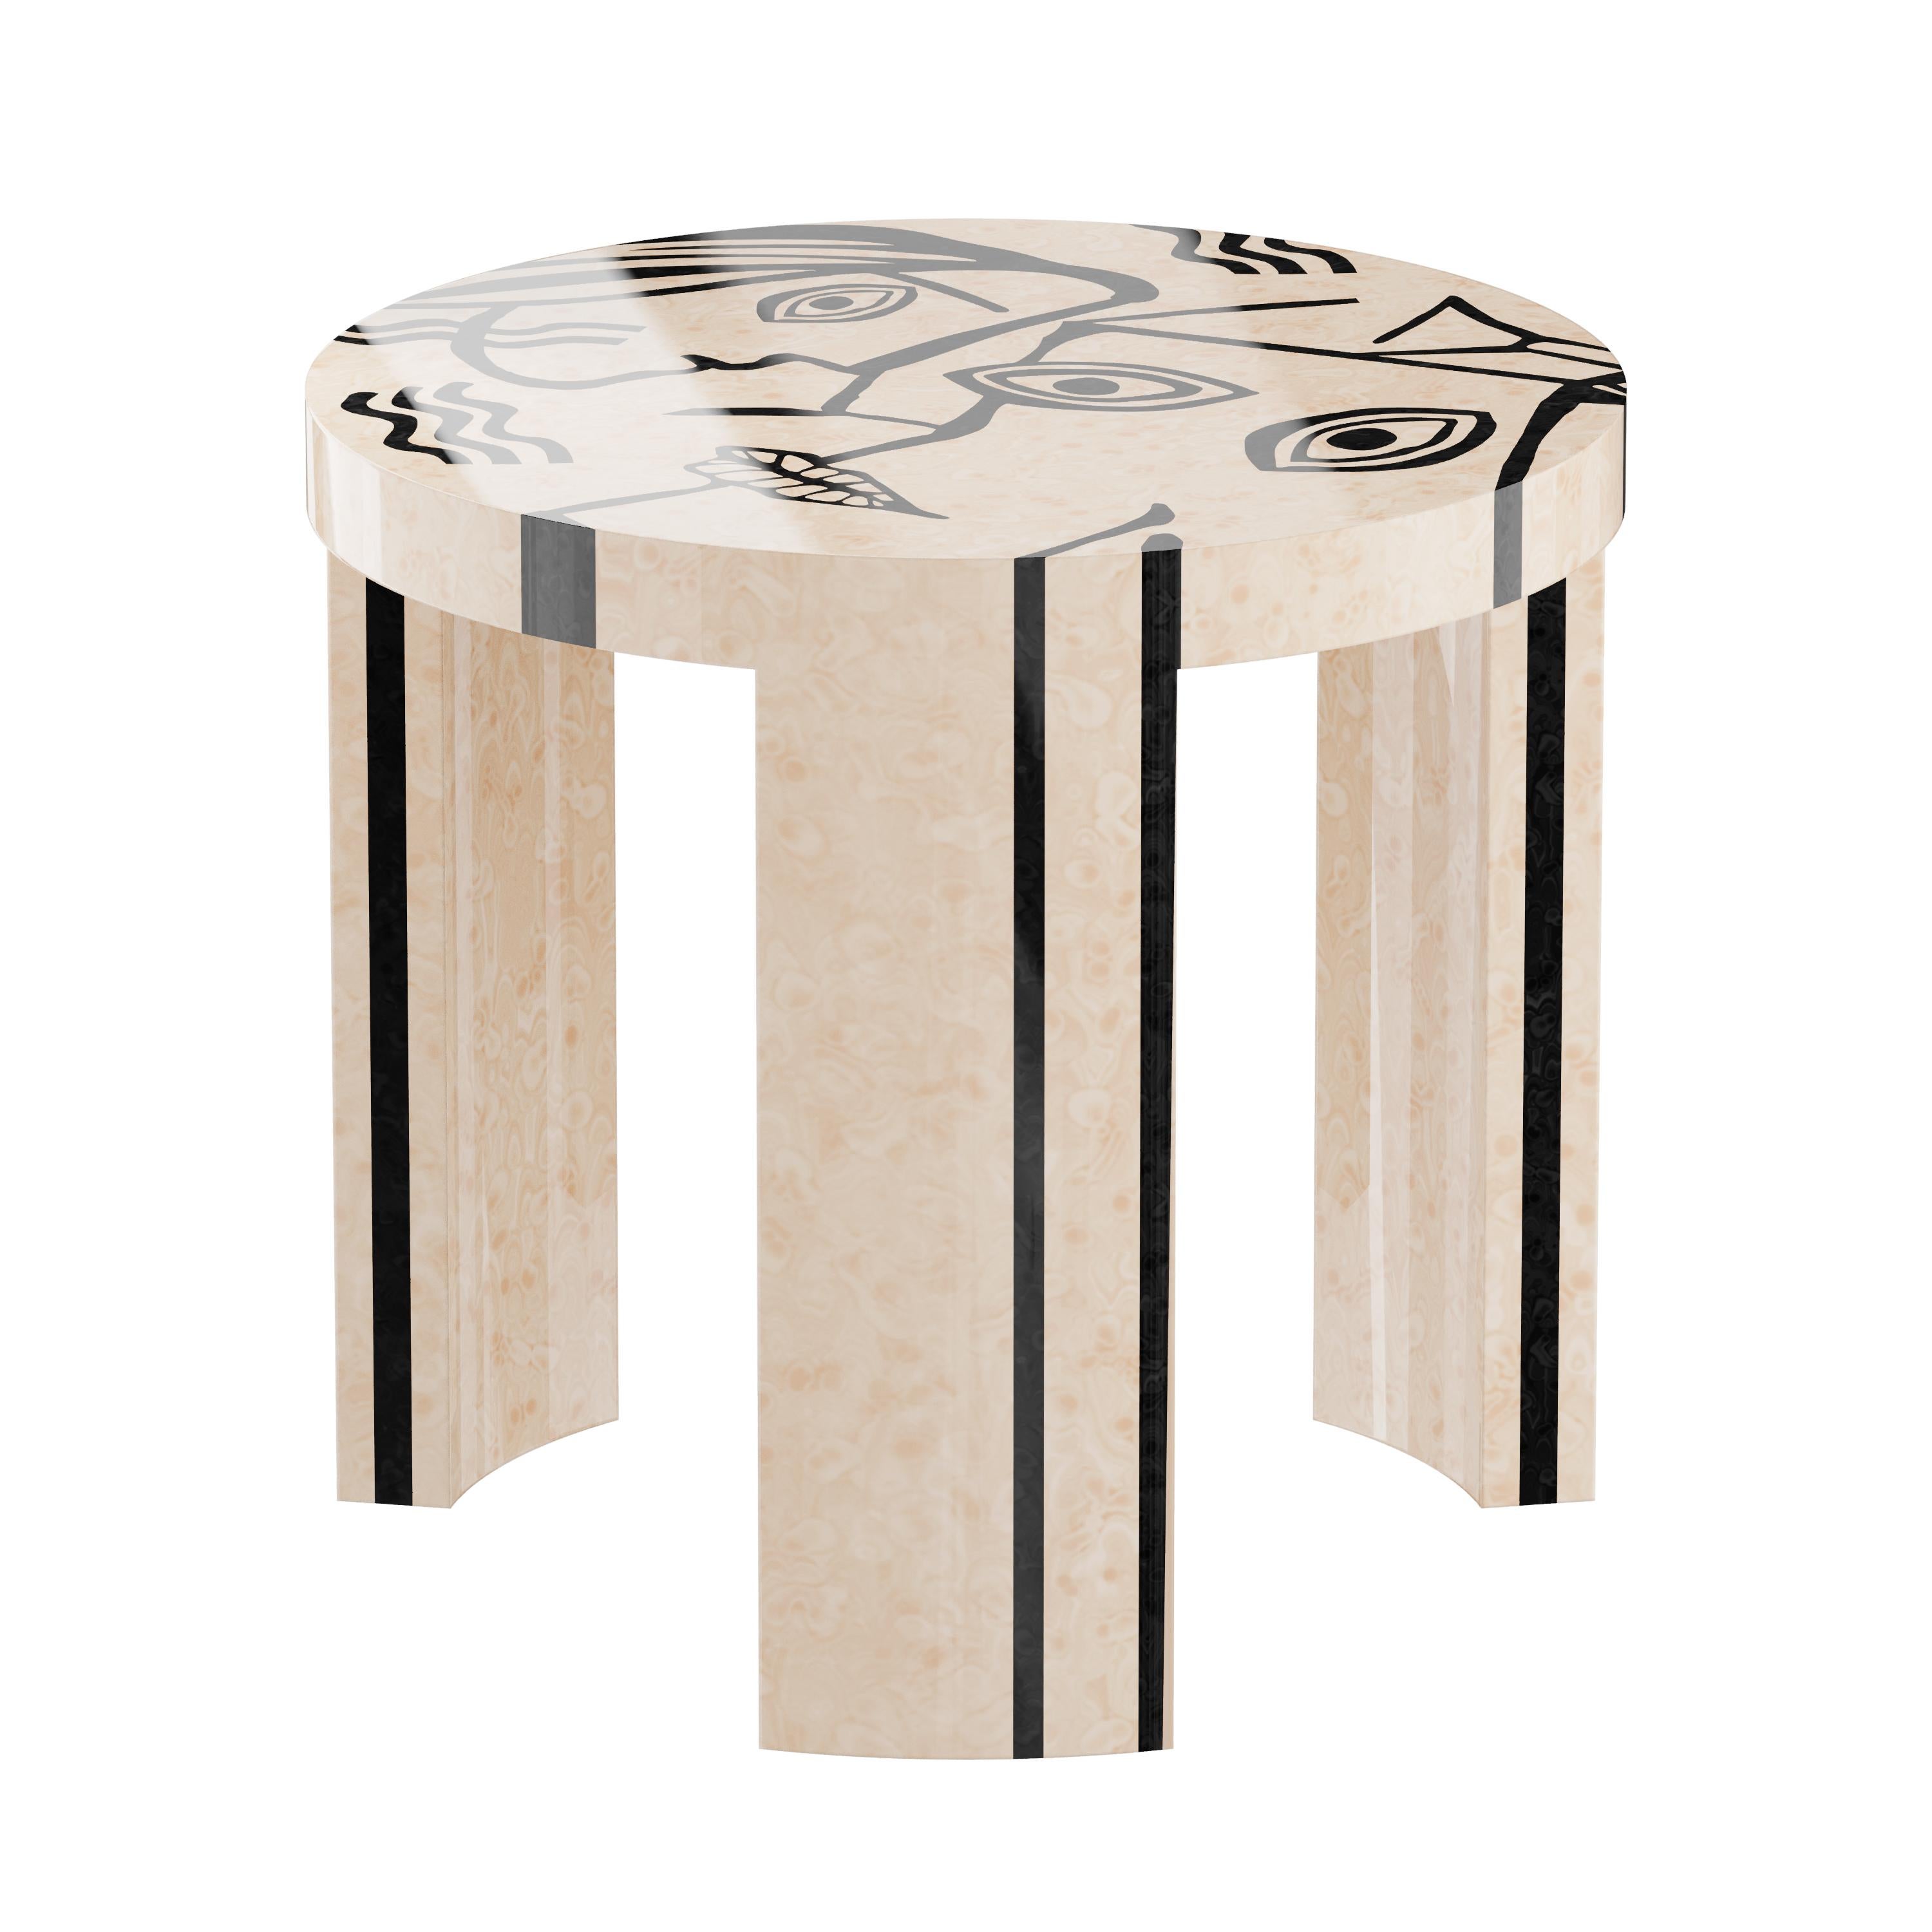 Portuguese Mid-Century Modern Round Side Table Abstract Cubist Pattern White Wood Marquetry For Sale